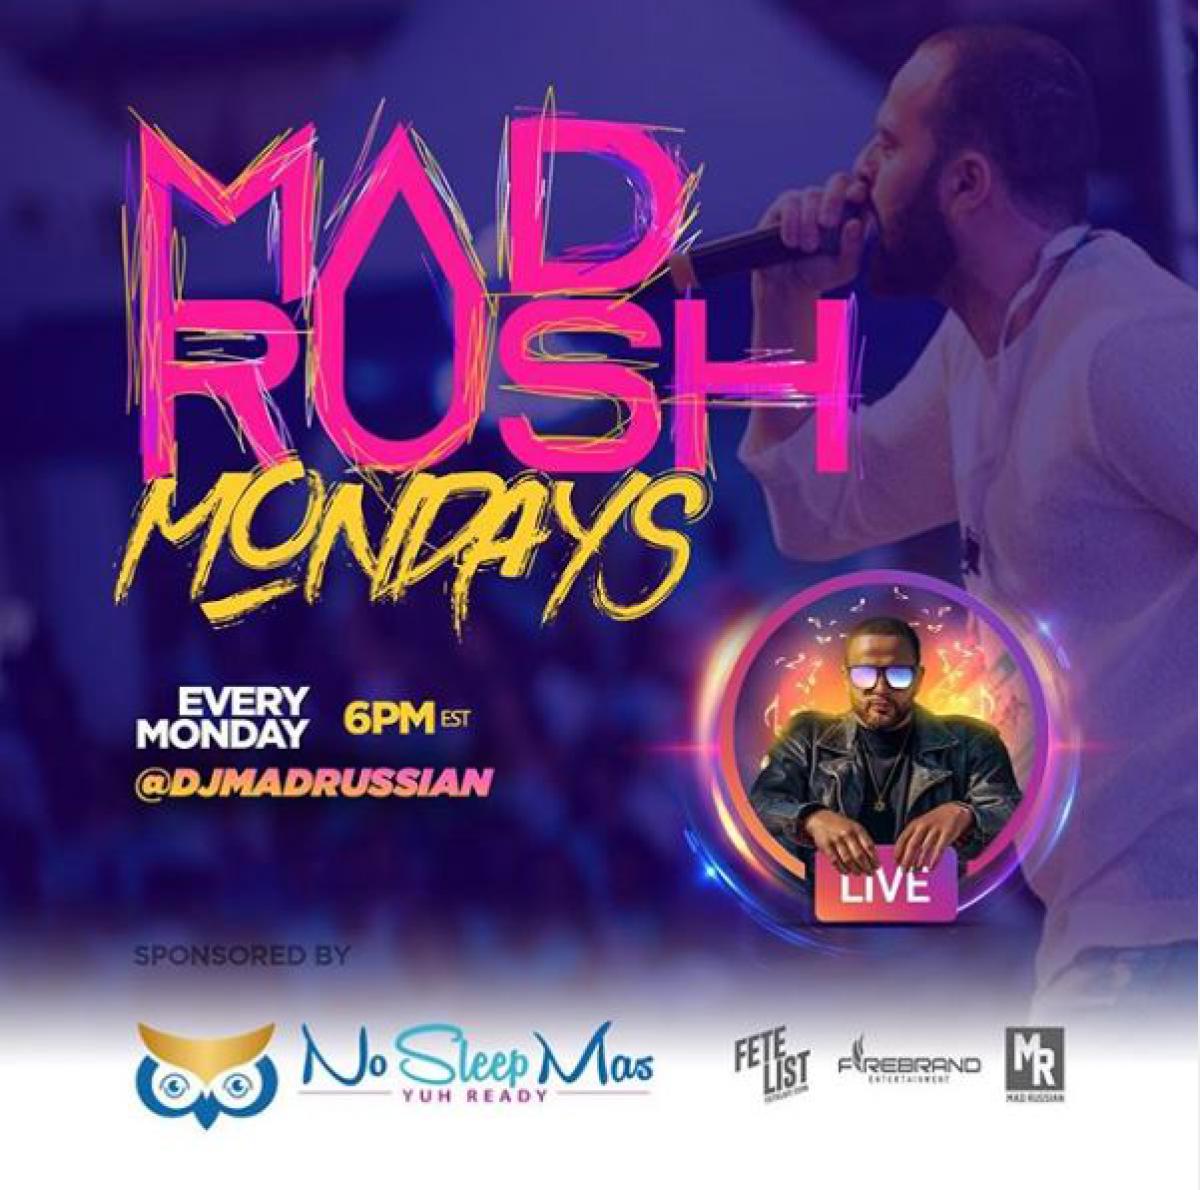 Mad Rush Mondays  flyer or graphic.